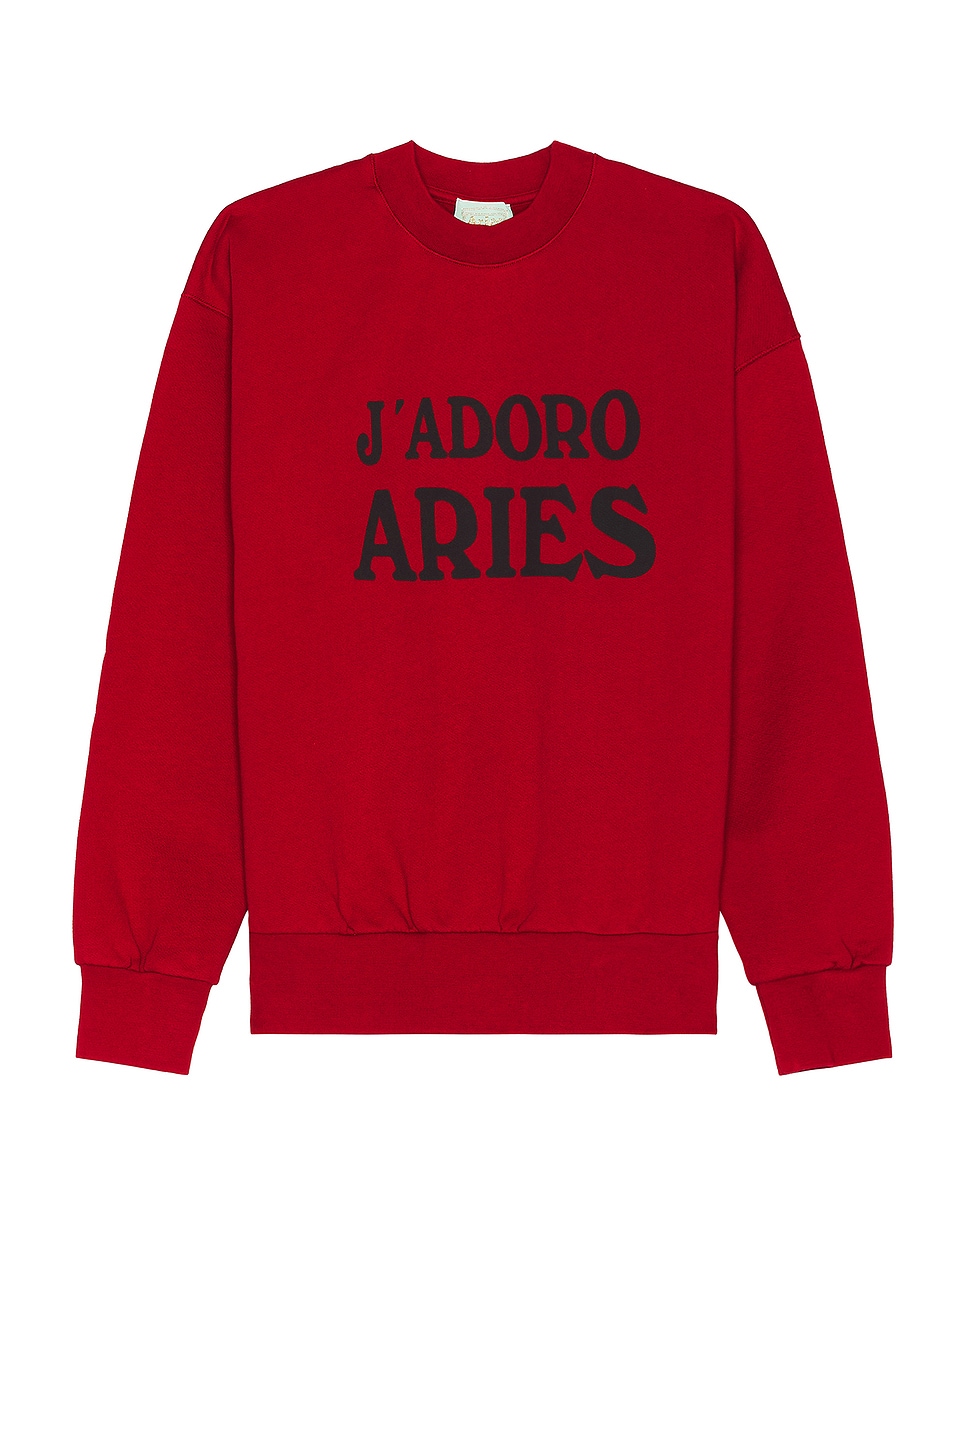 Image 1 of Aries J'adoro Aries Sweater in Red